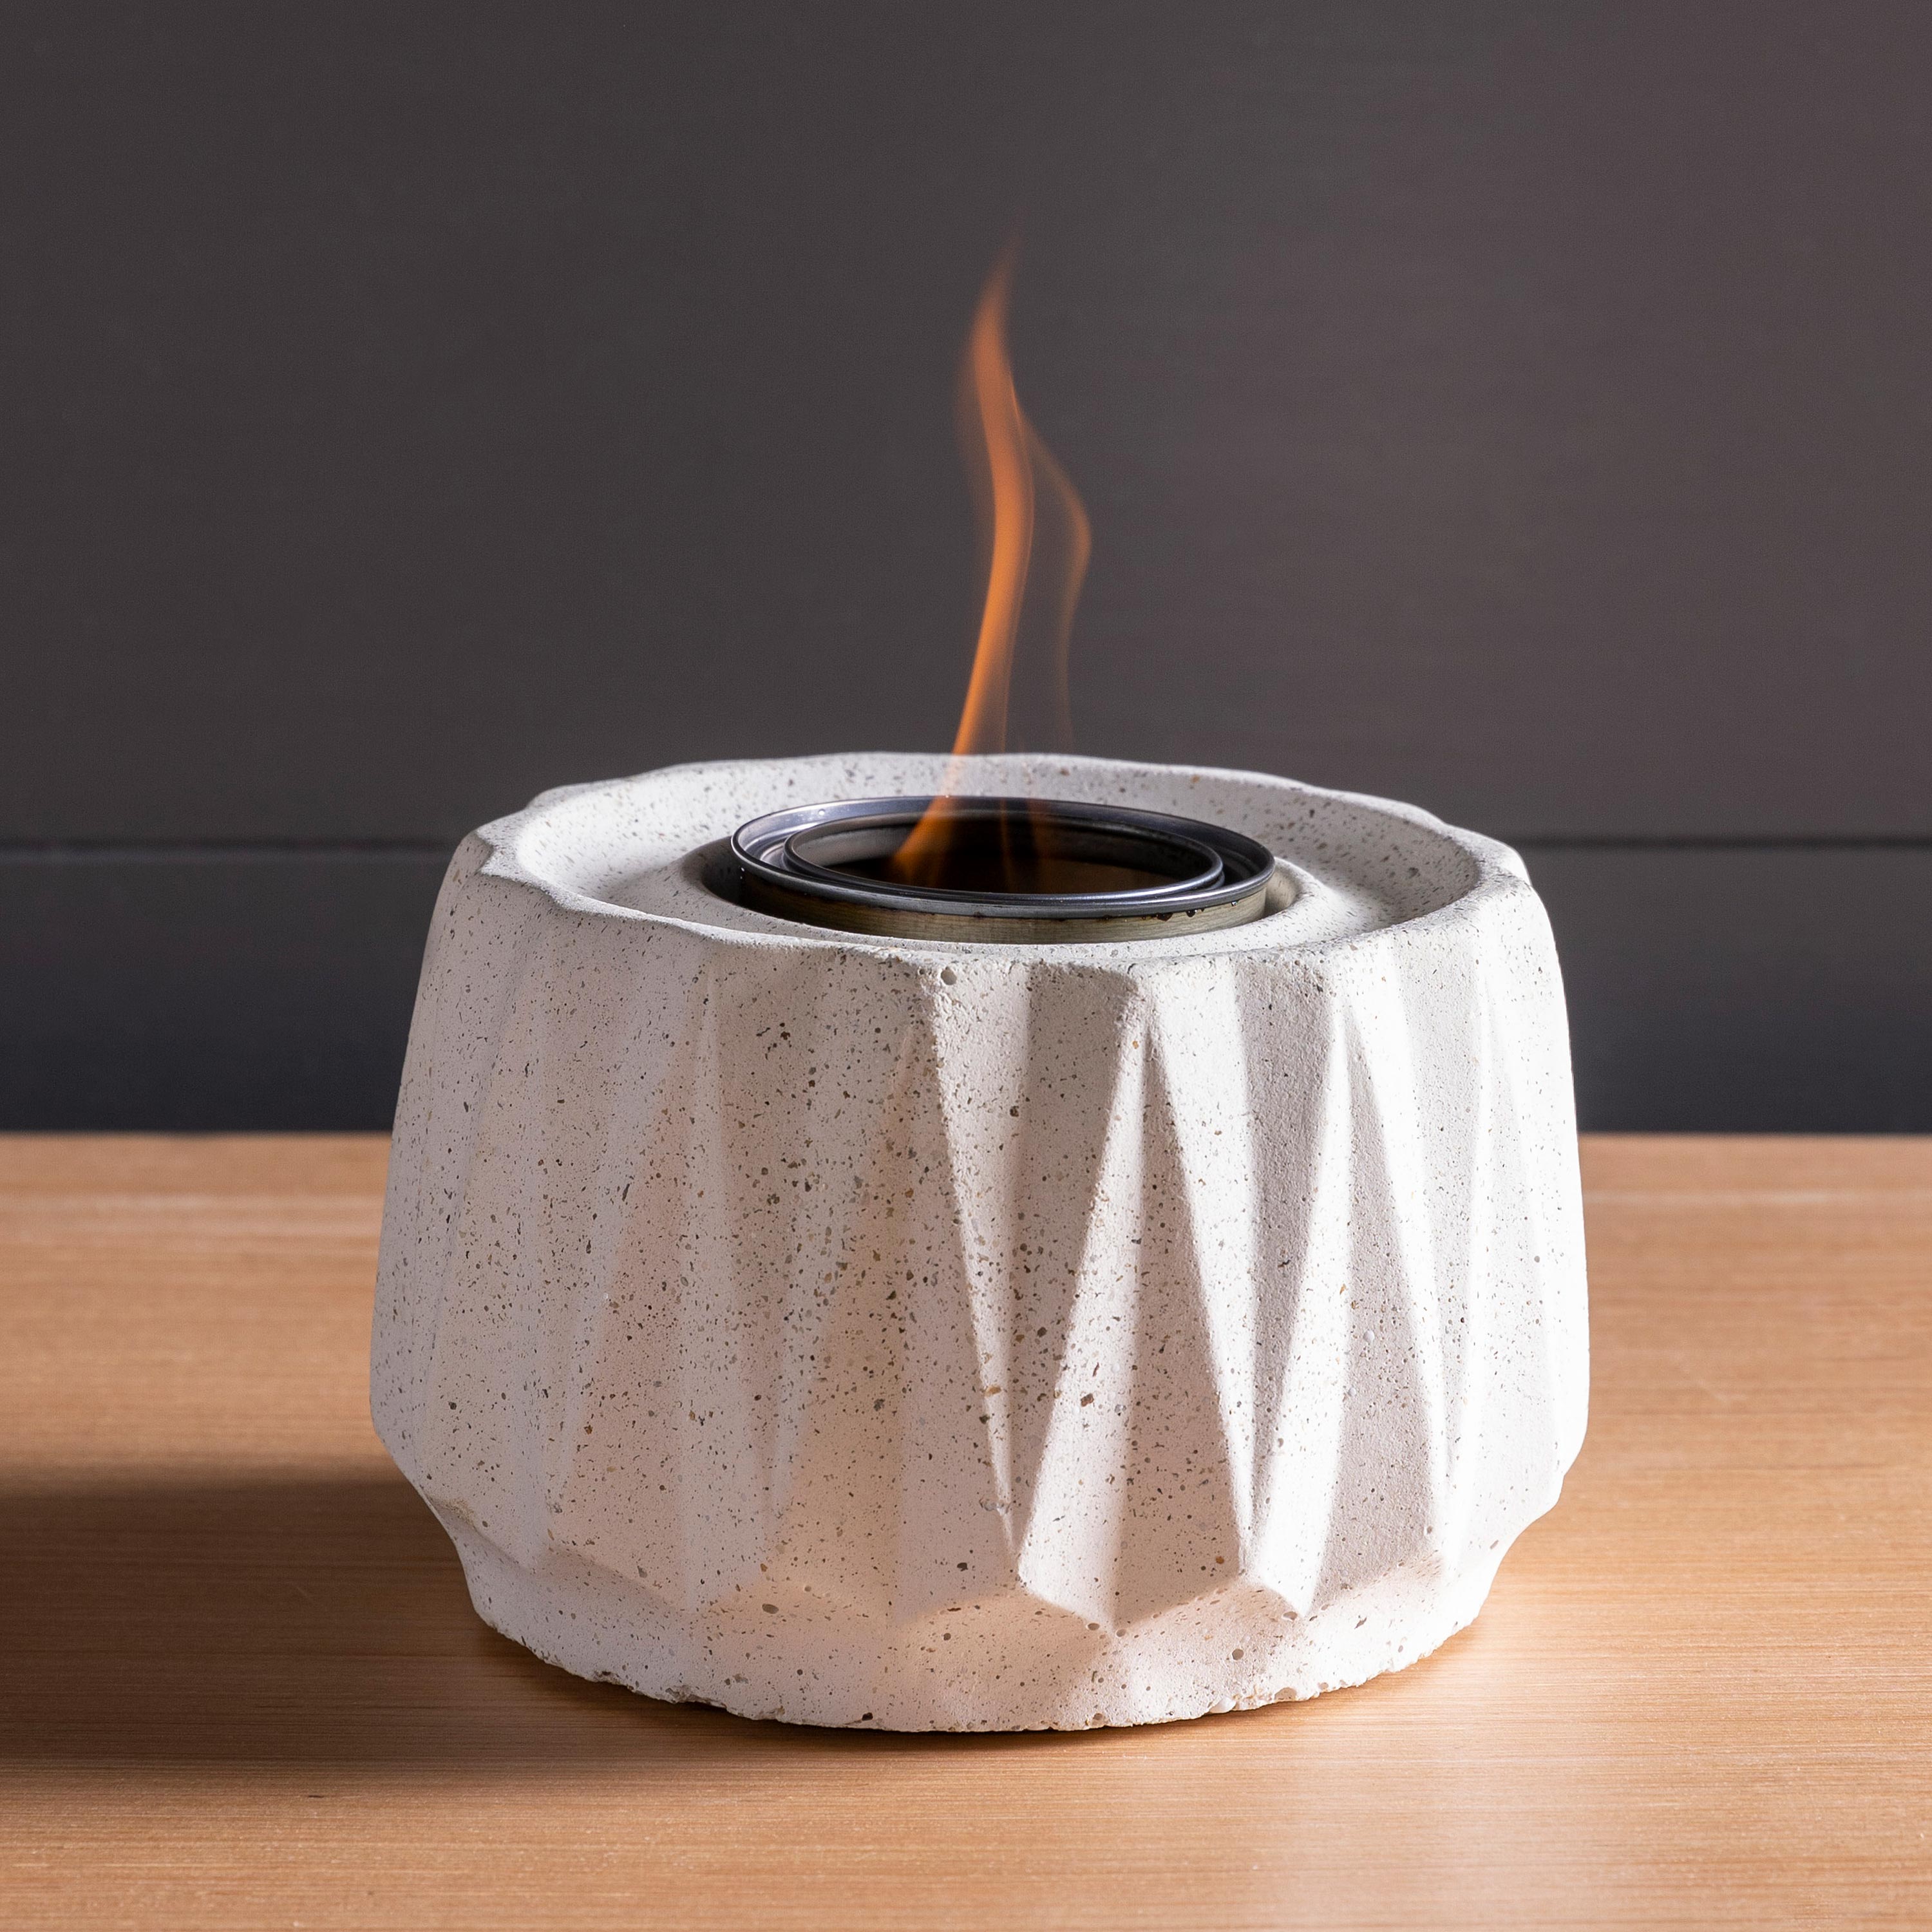 S'mores Roaster Tabletop Fire Bowl